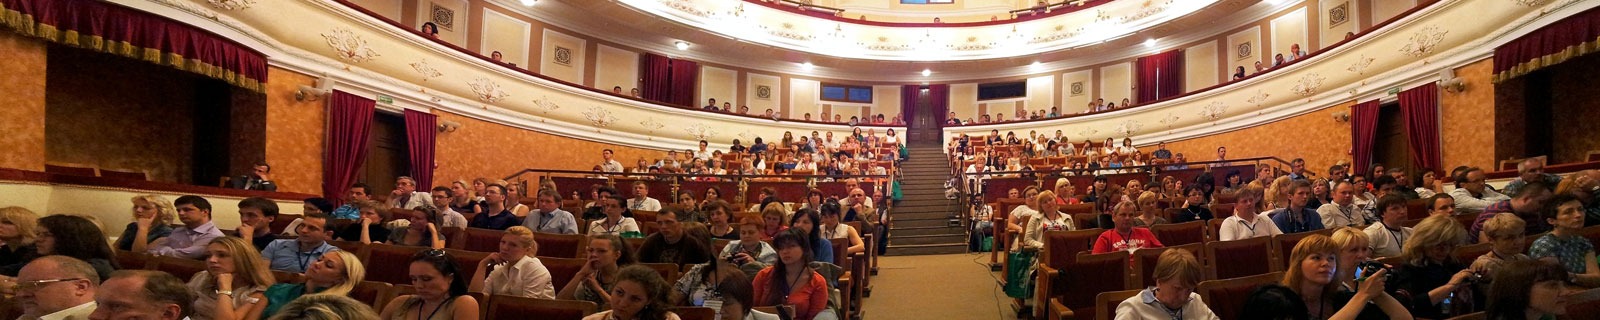       -  . .. . / The seminar is taking place in the Poltava regional Ukraine theatre of music and drama, named after N.V. Gogol.